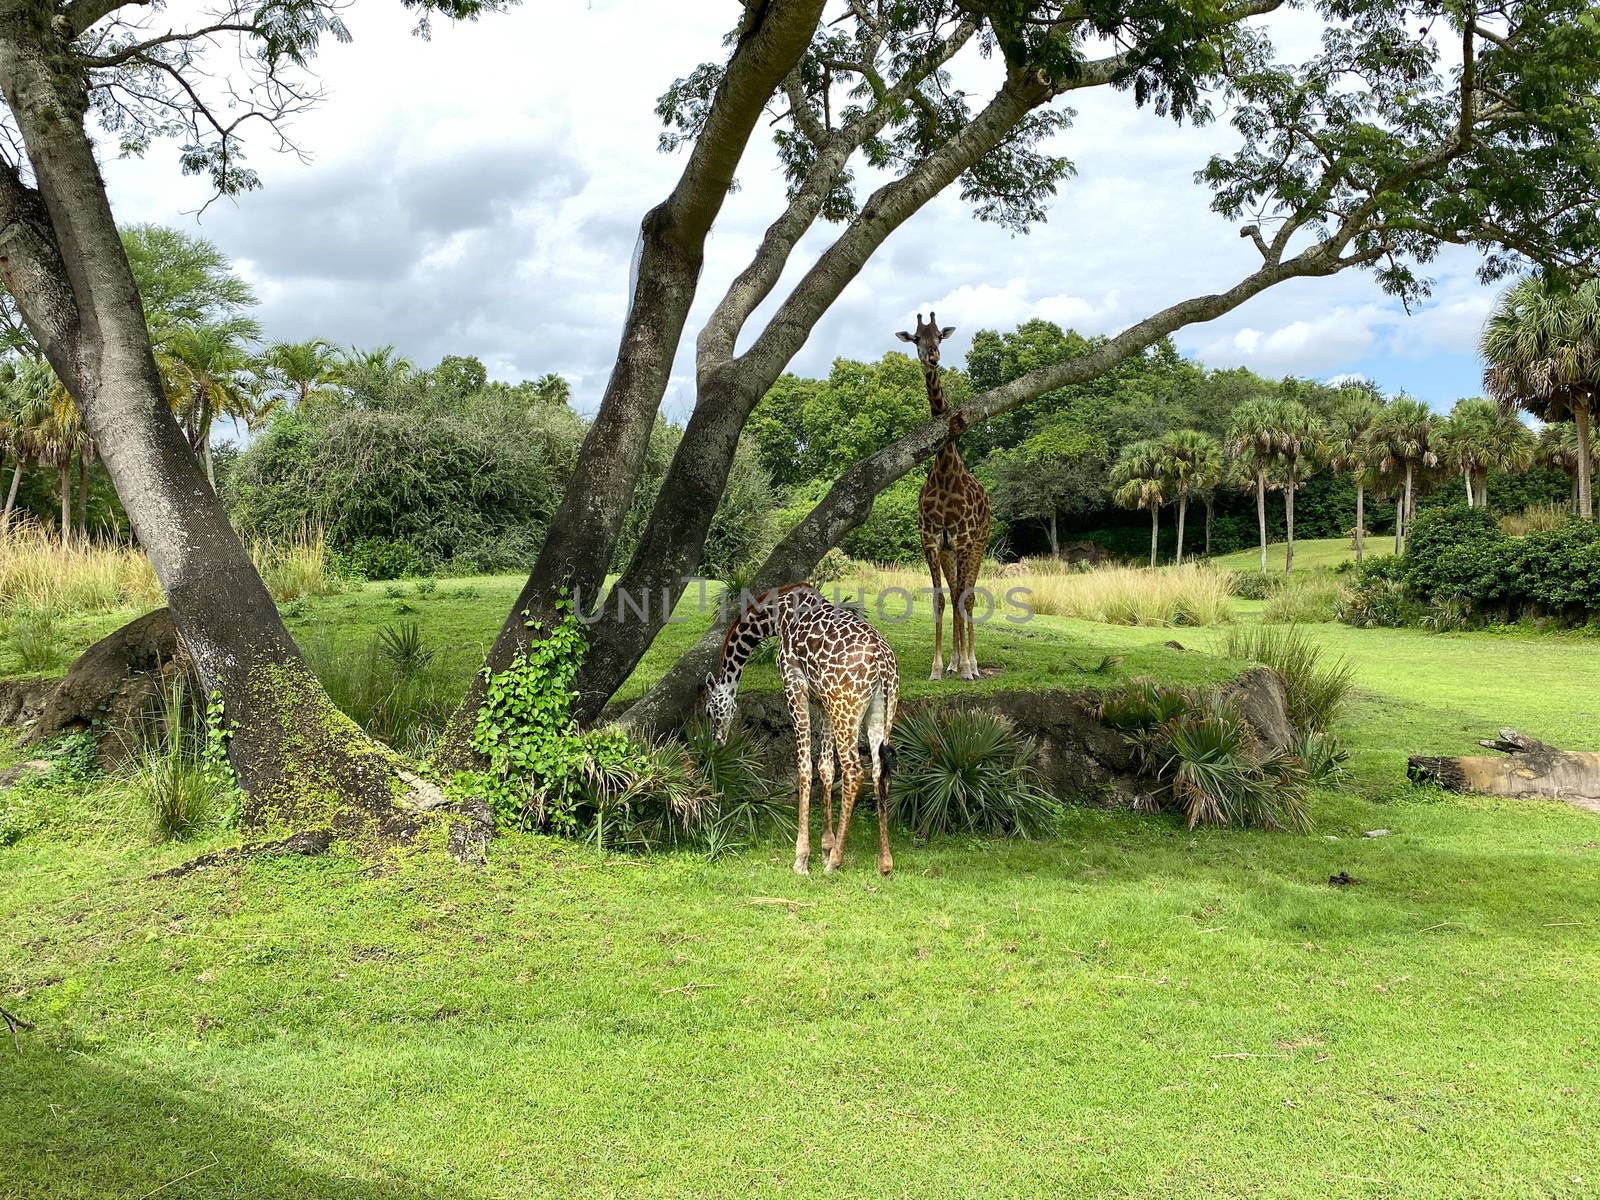 A tower of Giraffes grazing on trees on a savannah at a zoo by Jshanebutt